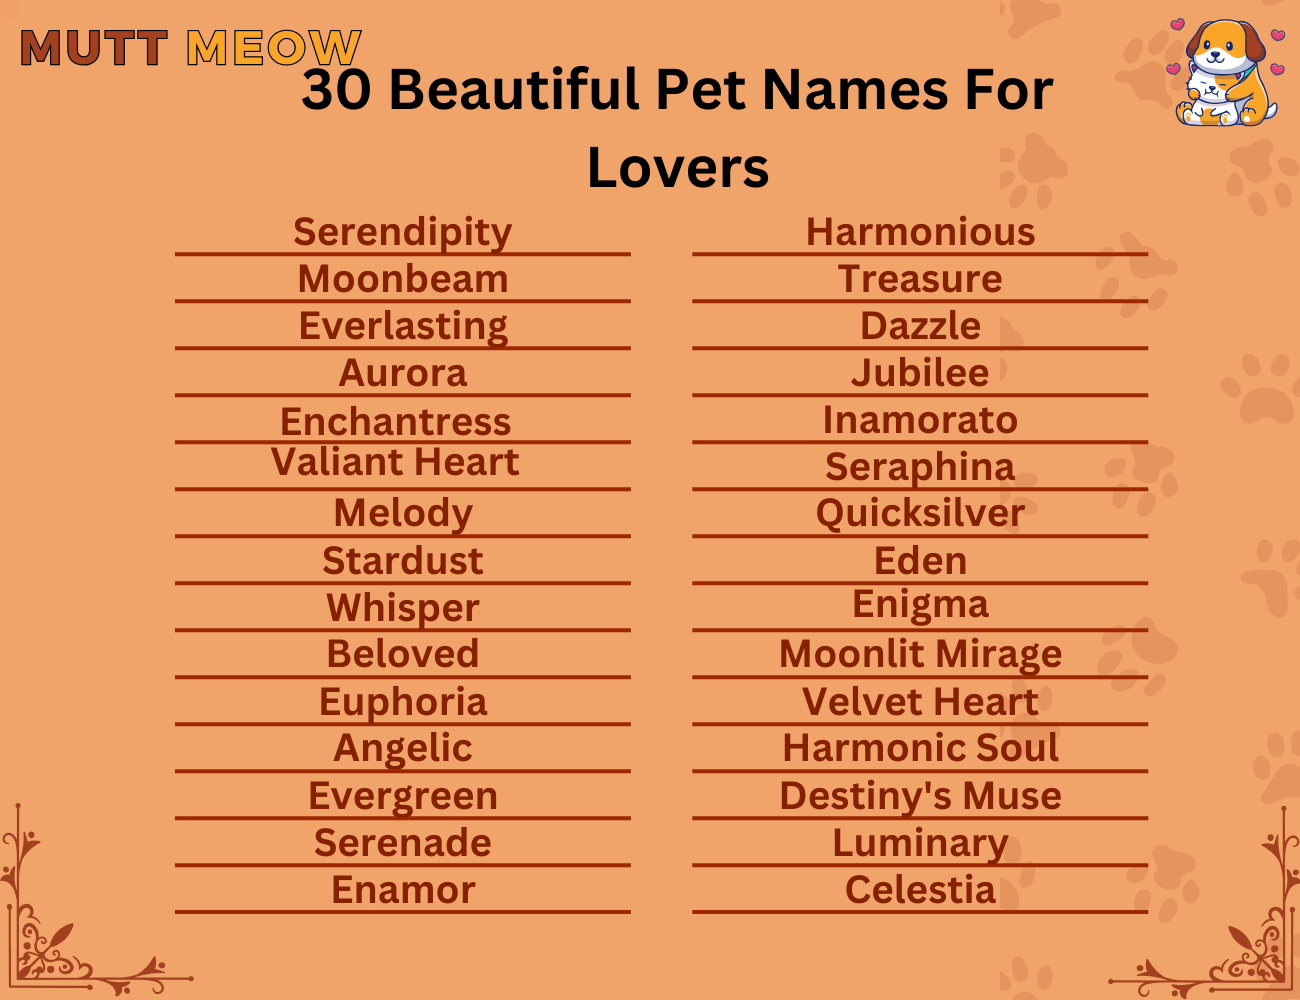 30 Beautiful Pet Names For Lovers